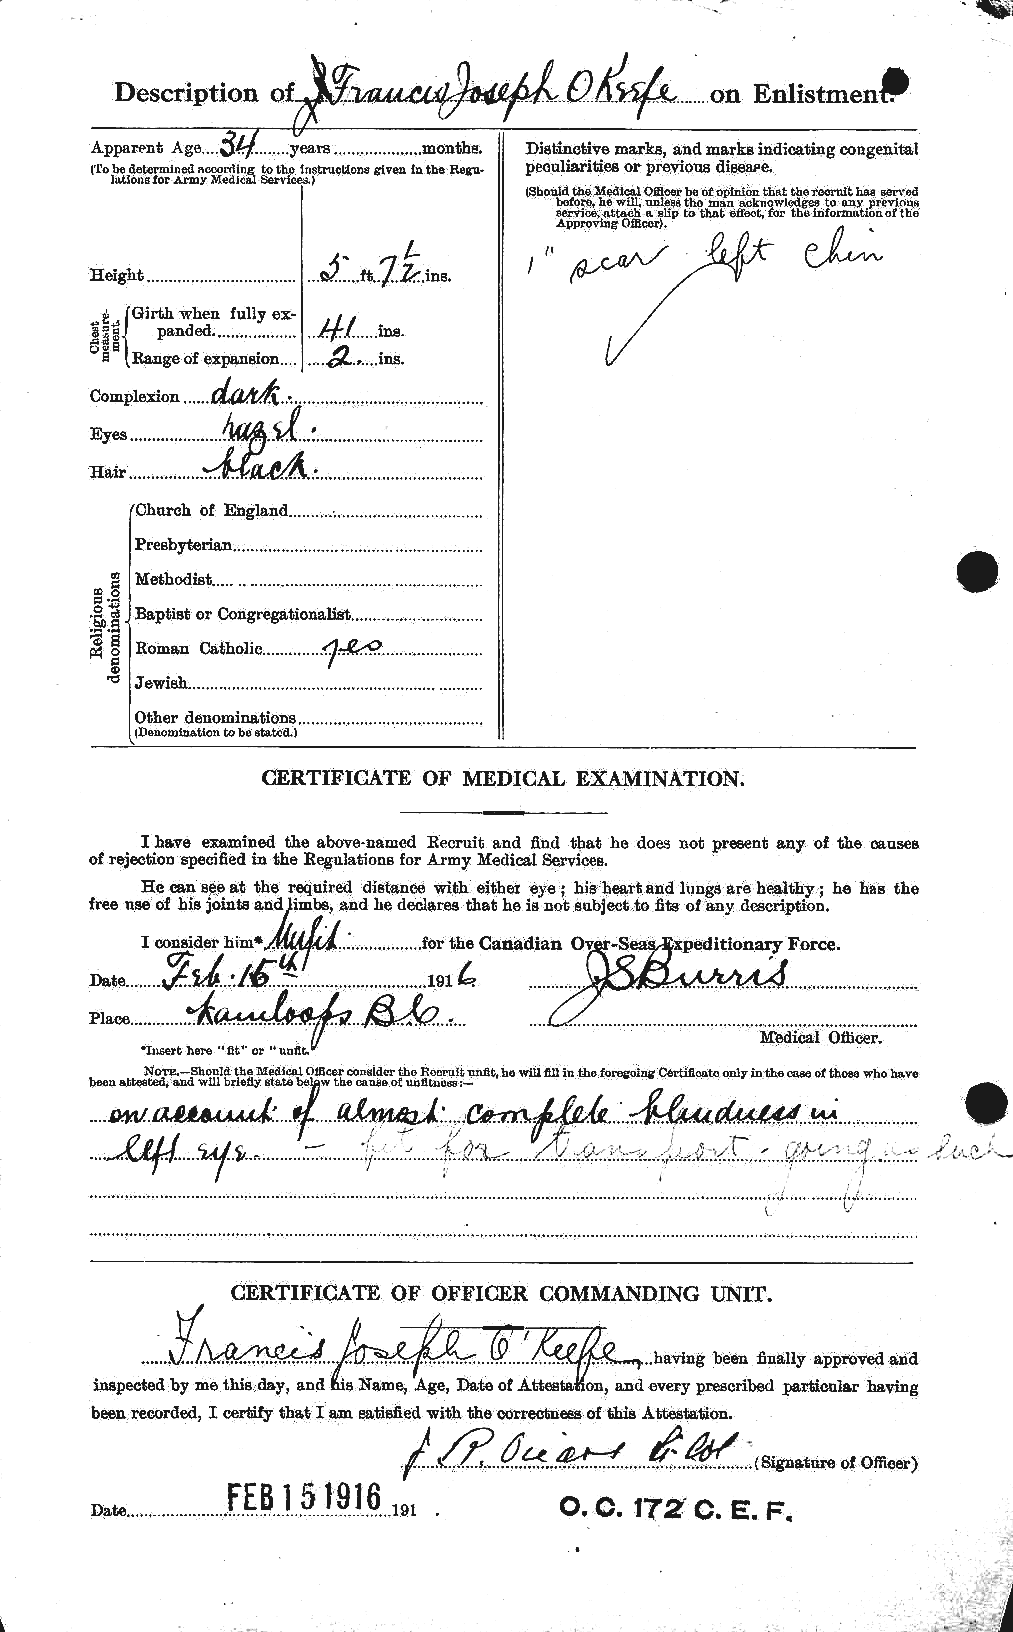 Personnel Records of the First World War - CEF 556311b